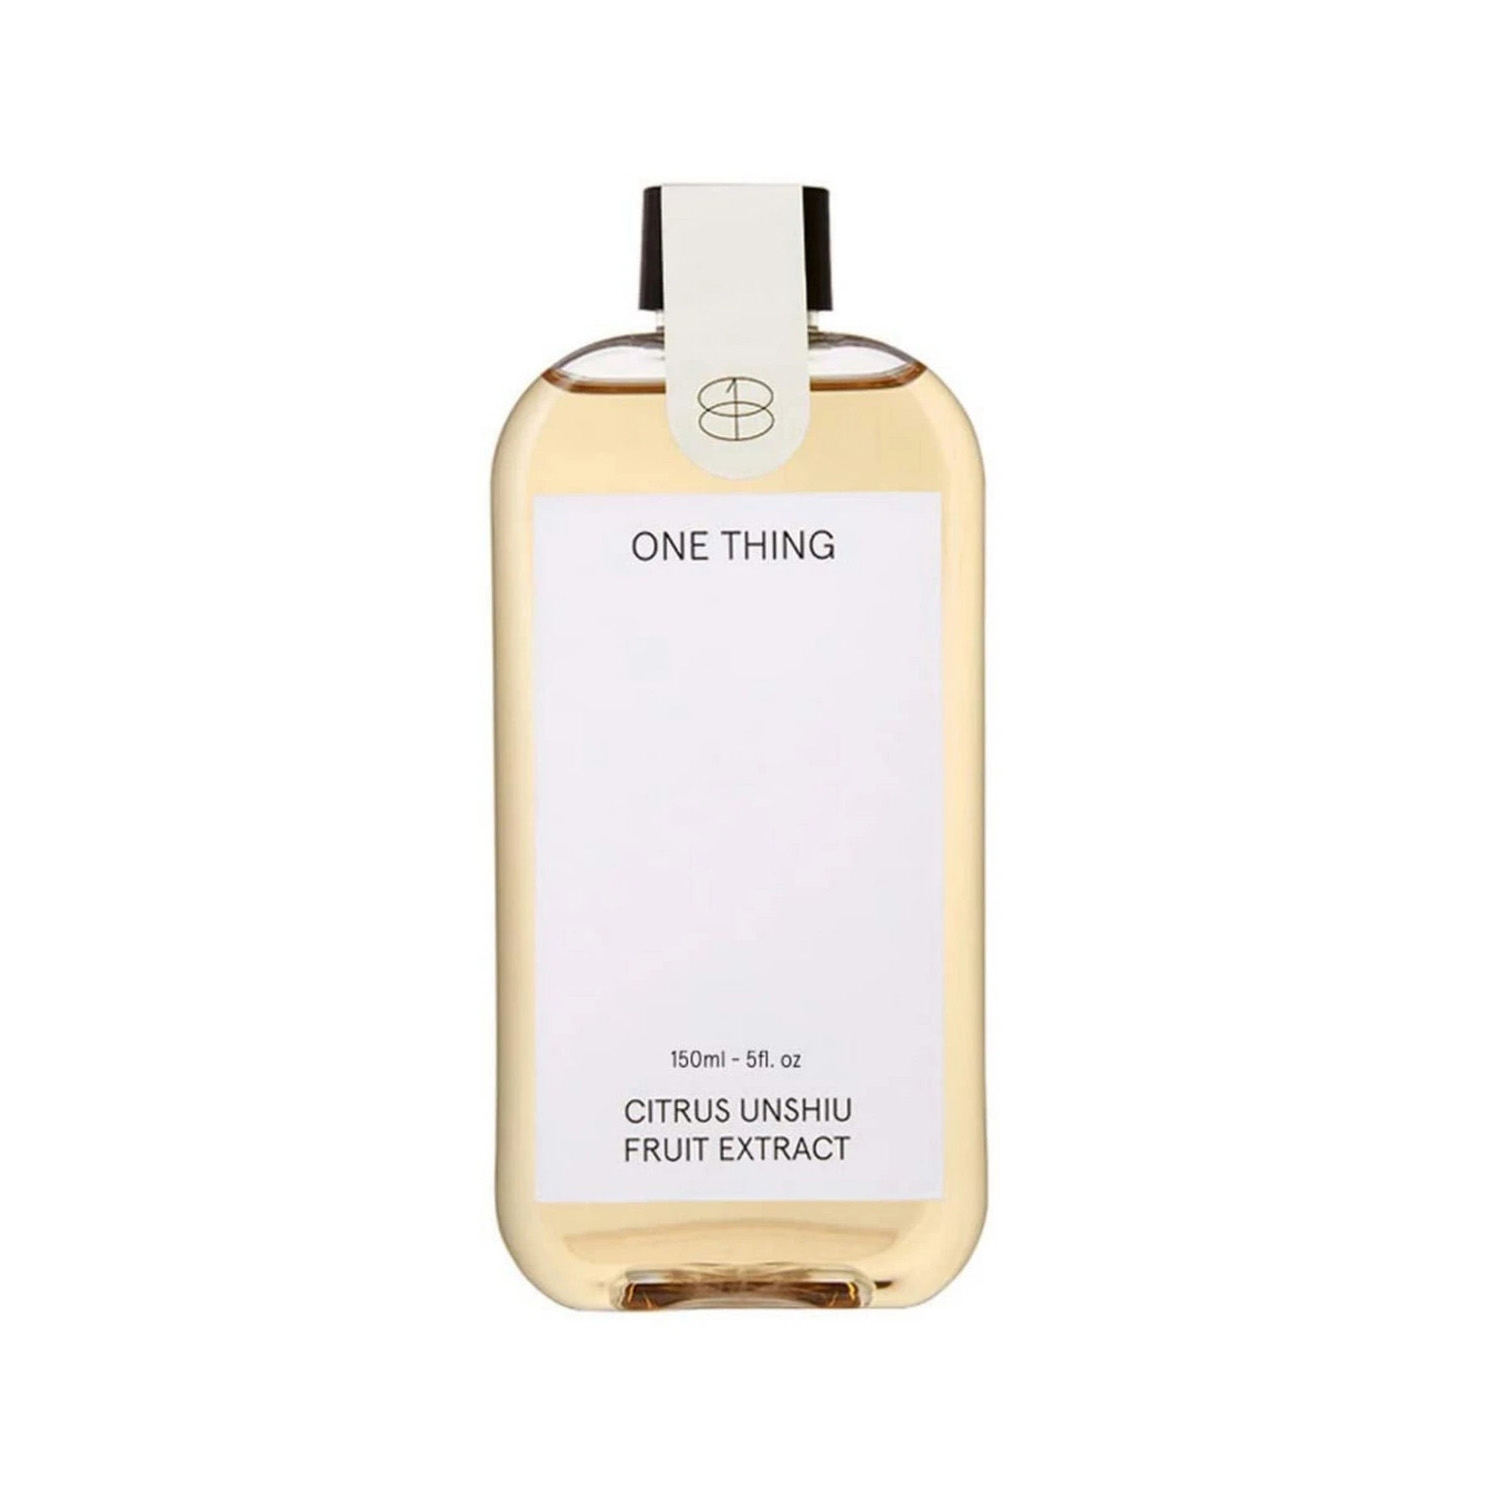 ONE THING | ONE THING Citrus Unshiu Fruit Extract (150ml)